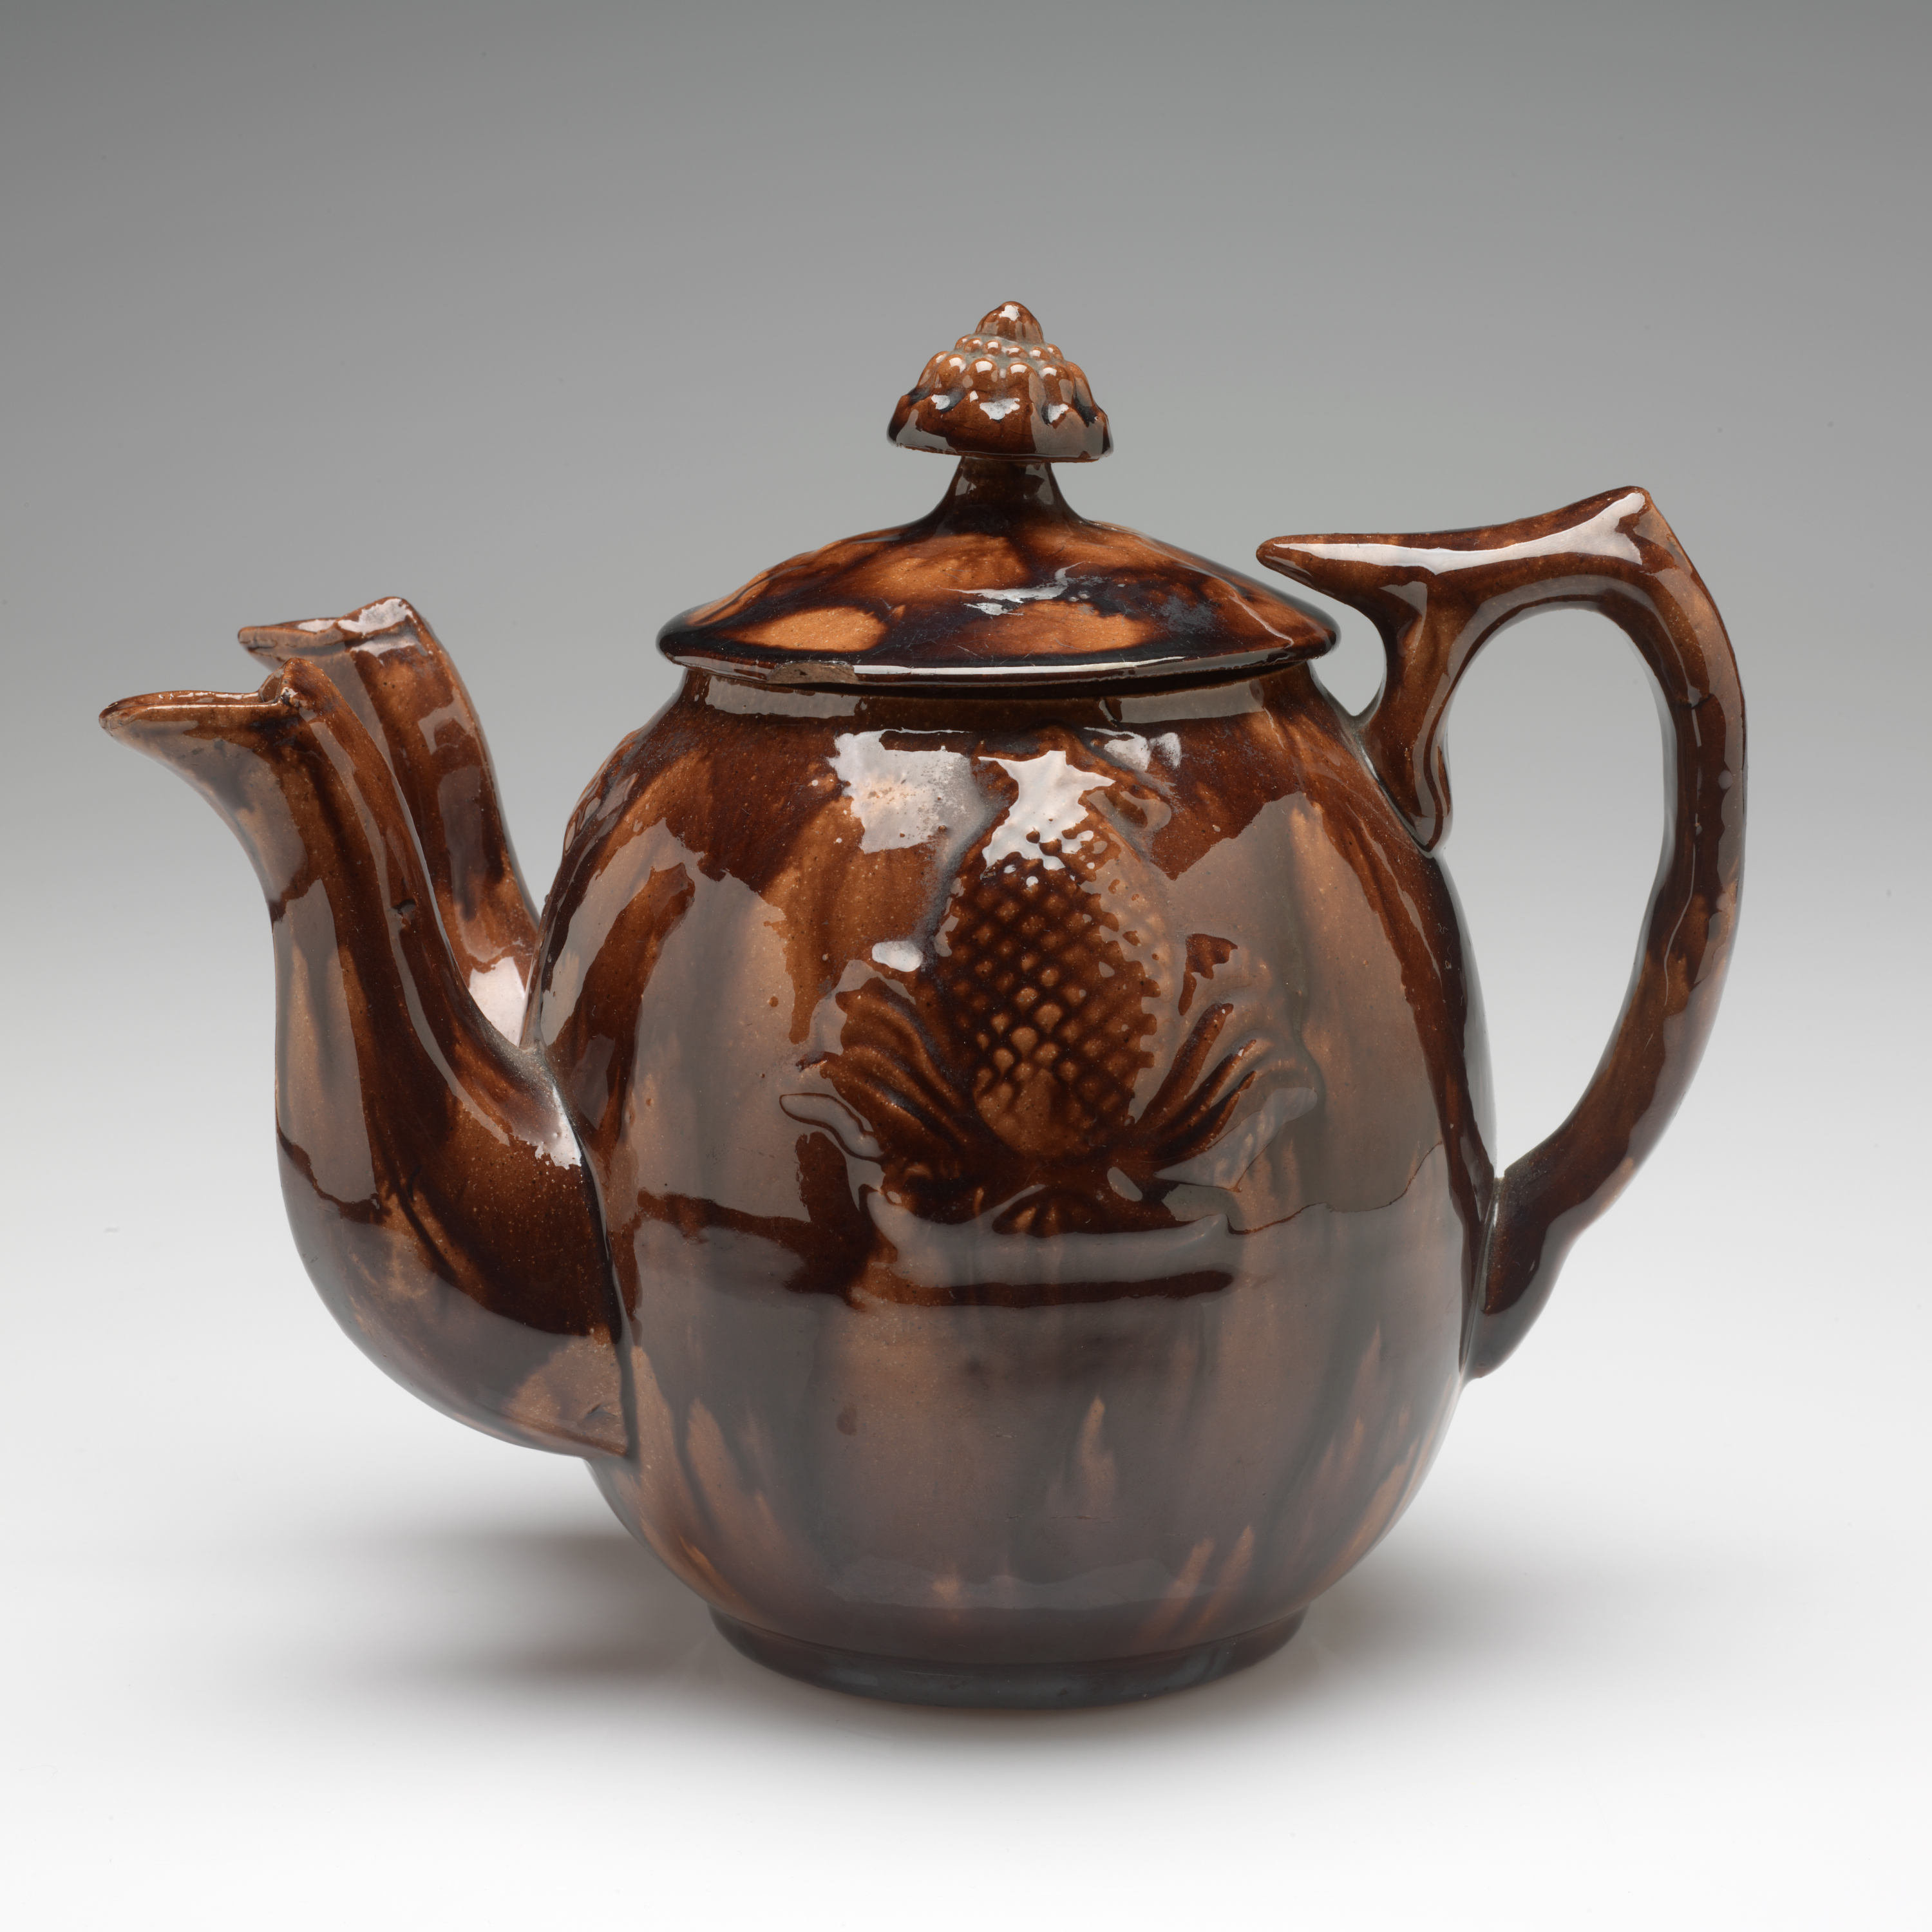 /A%20mottled%20brown%20teapot%20with%20an%20image%20of%20a%20pineapple%20in%20the%20center.%20Two%20spouts%20are%20on%20the%20left%20side%2C%20and%20a%20rounded%20handle%20with%20a%20flat%20top%20faces%20right.